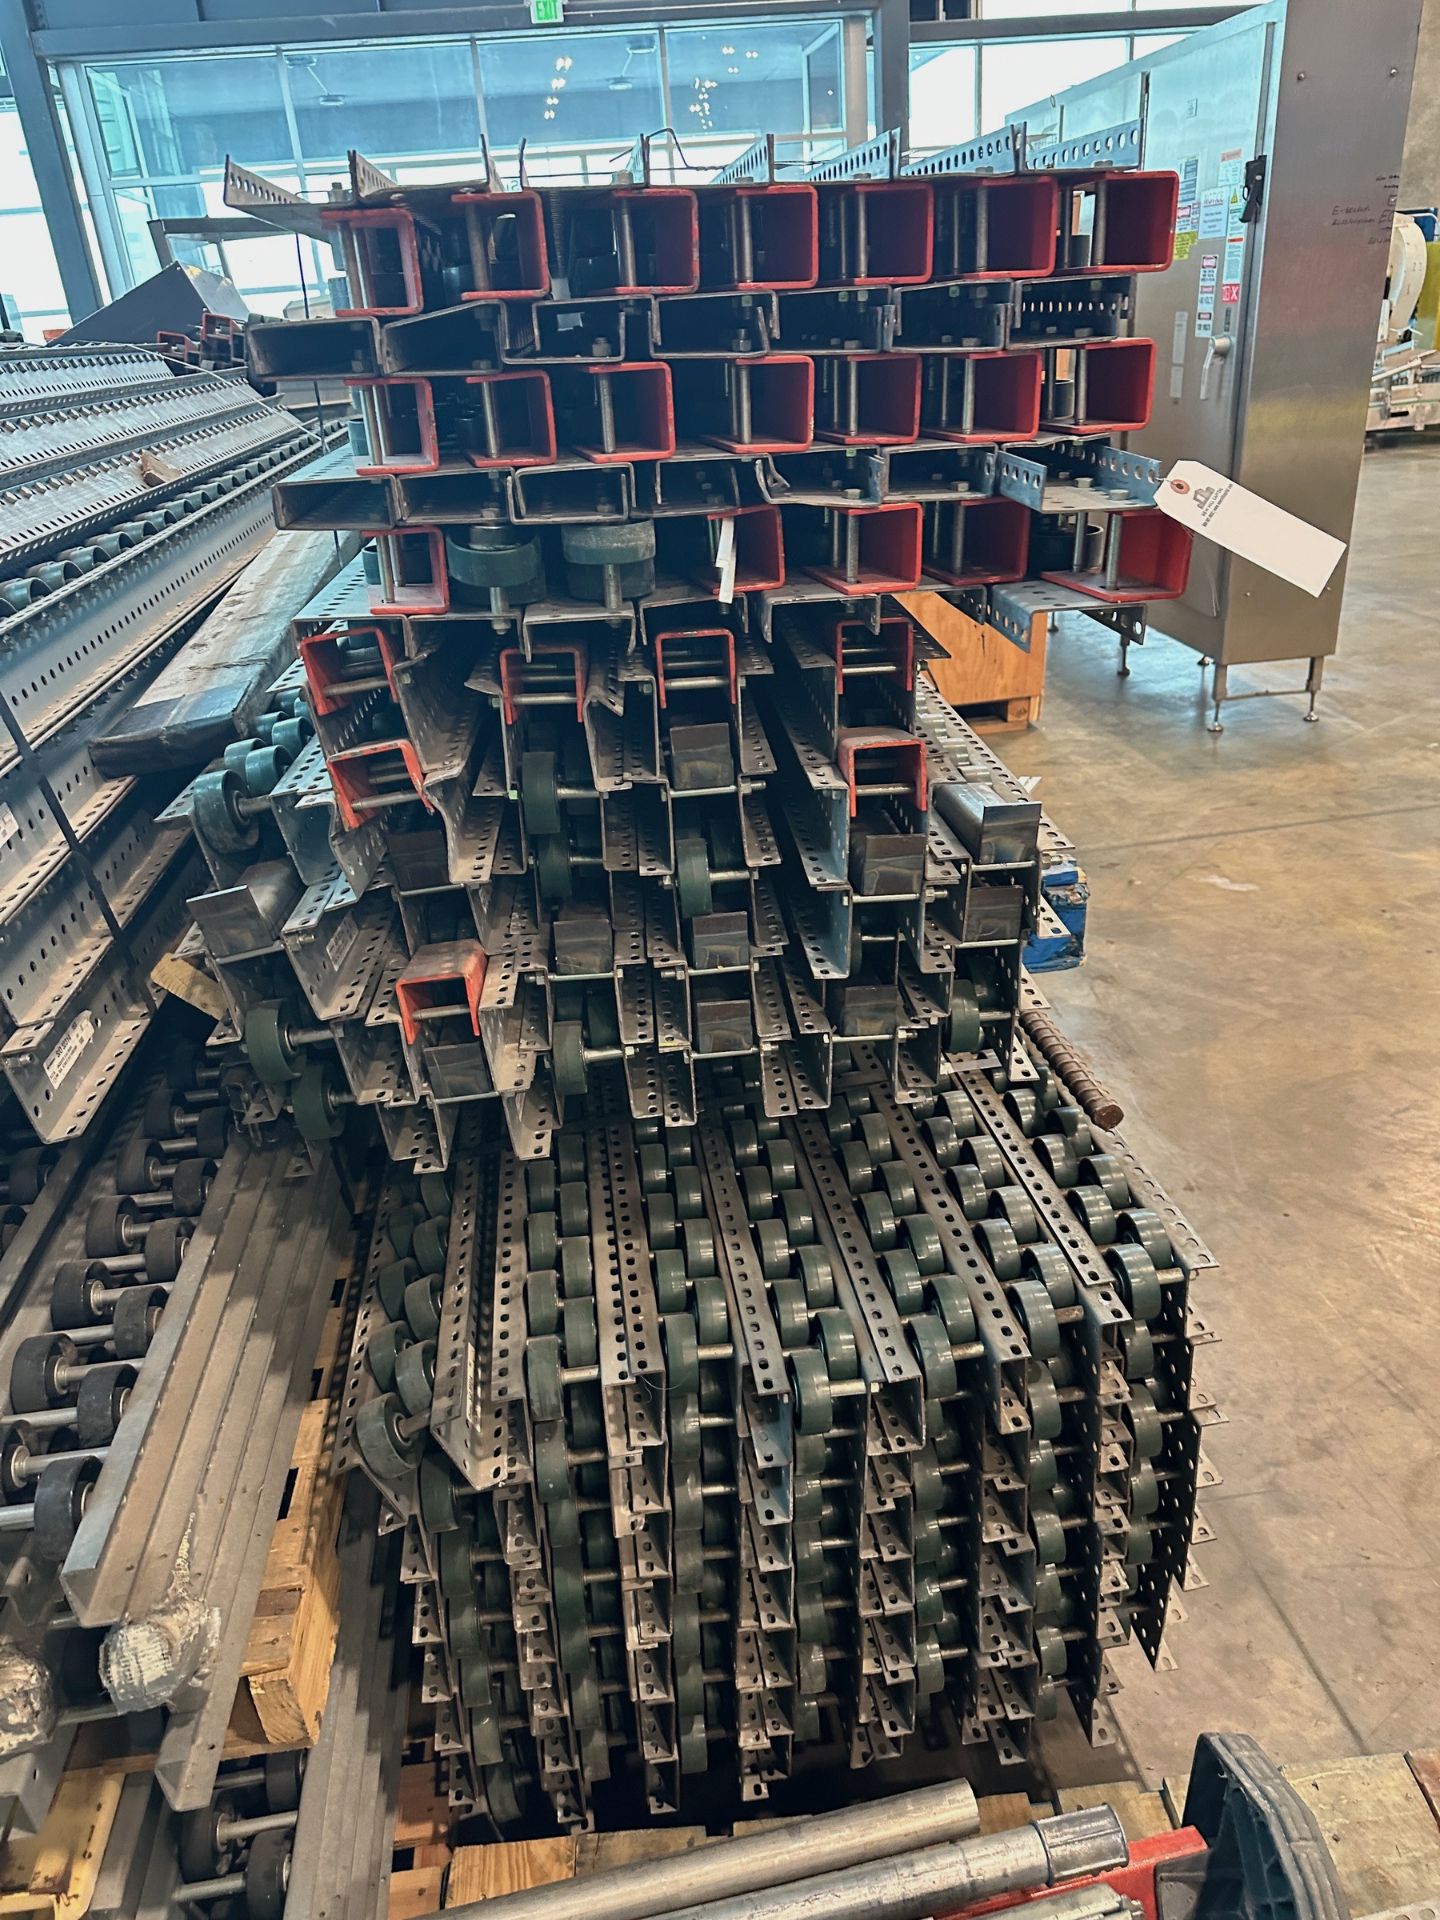 Lot of Interroll Pallet Racking Rollers - Approx. (150) Total Pieces at 5" x 100" | Rig Fee $350 - Image 2 of 5